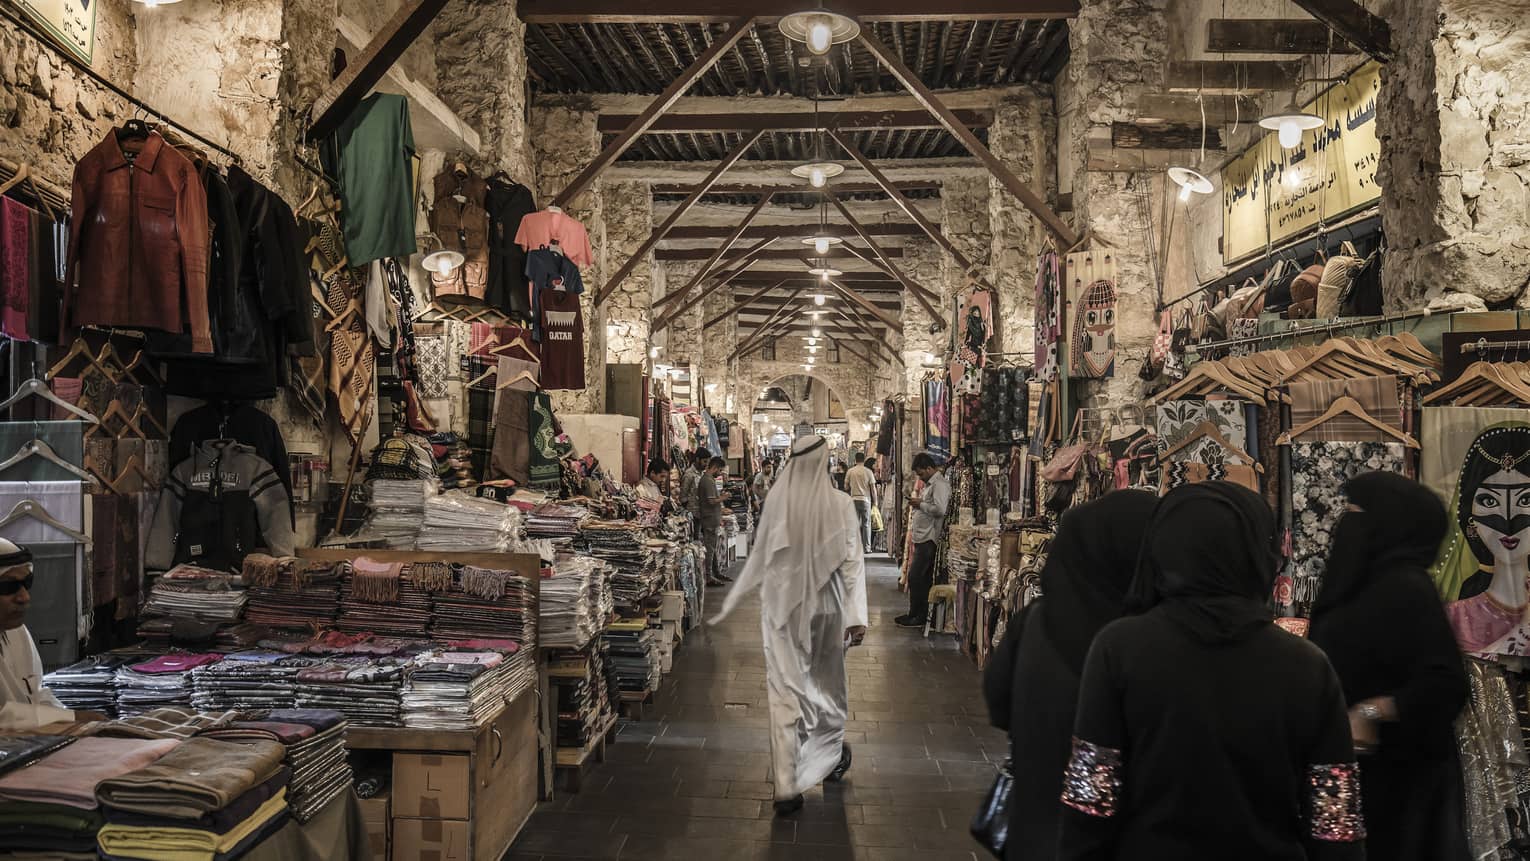 People walk past tables with textiles, clothes in indoor market